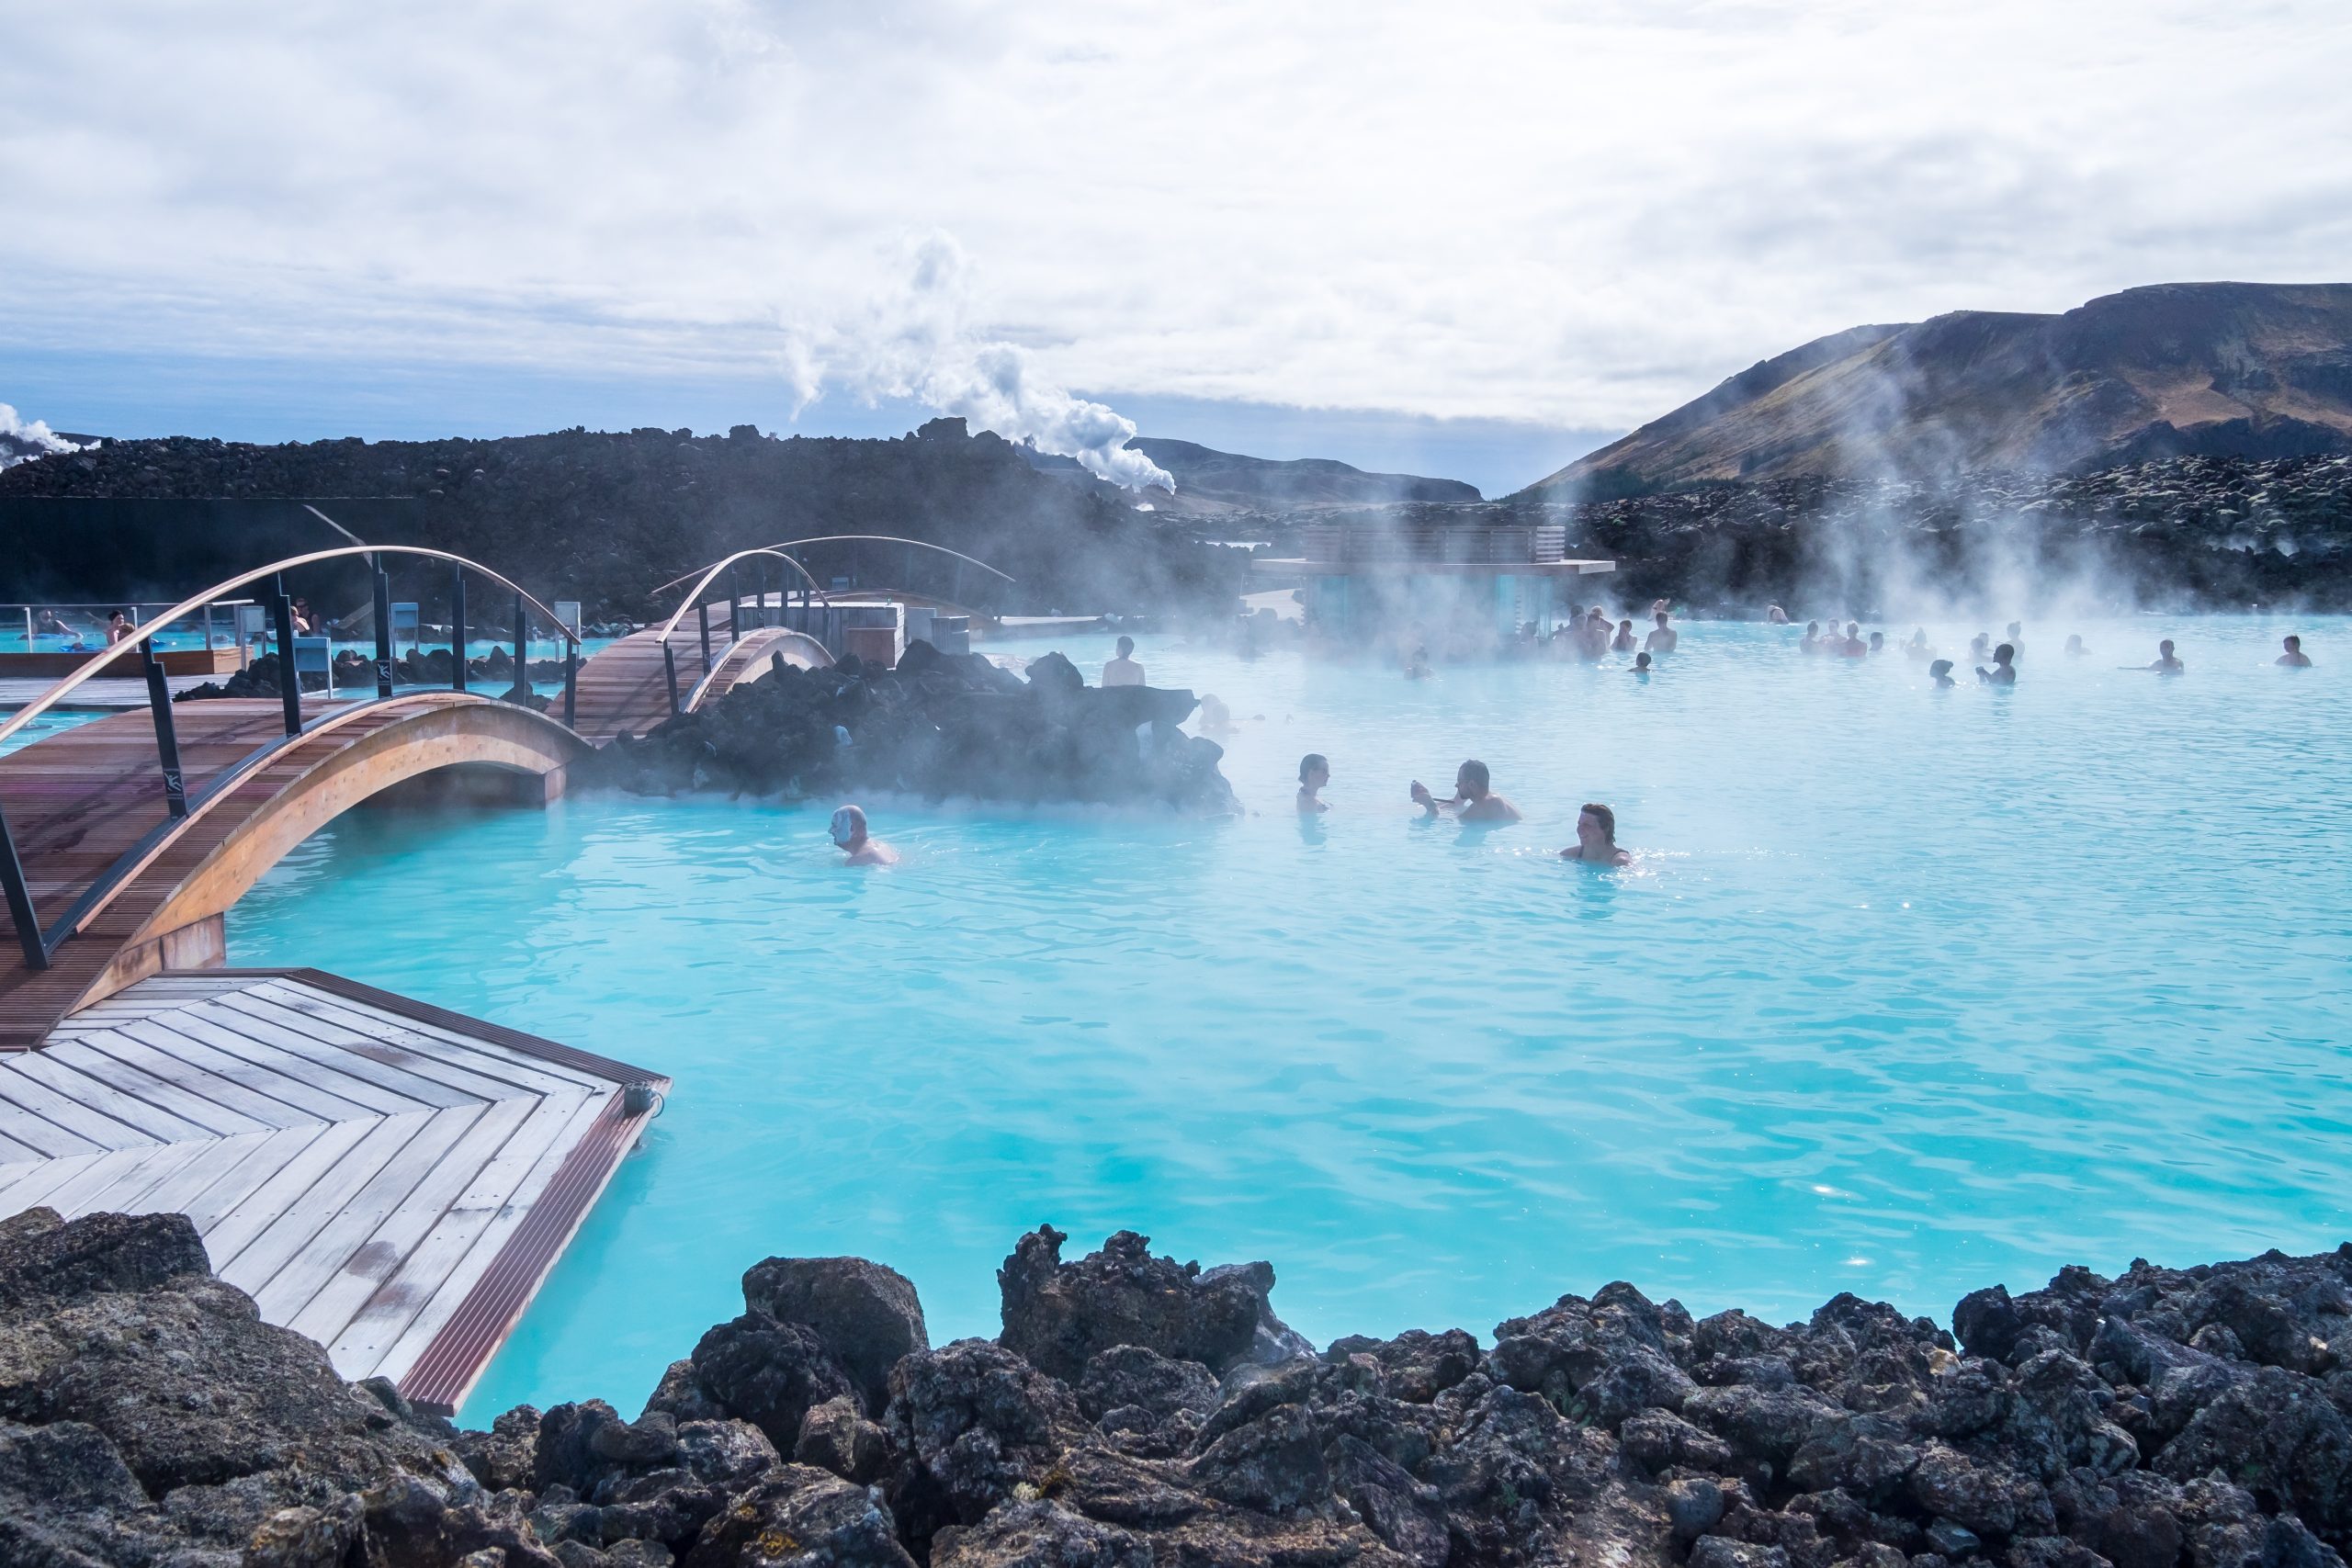 Visiting The Blue Lagoon in Iceland In a Day